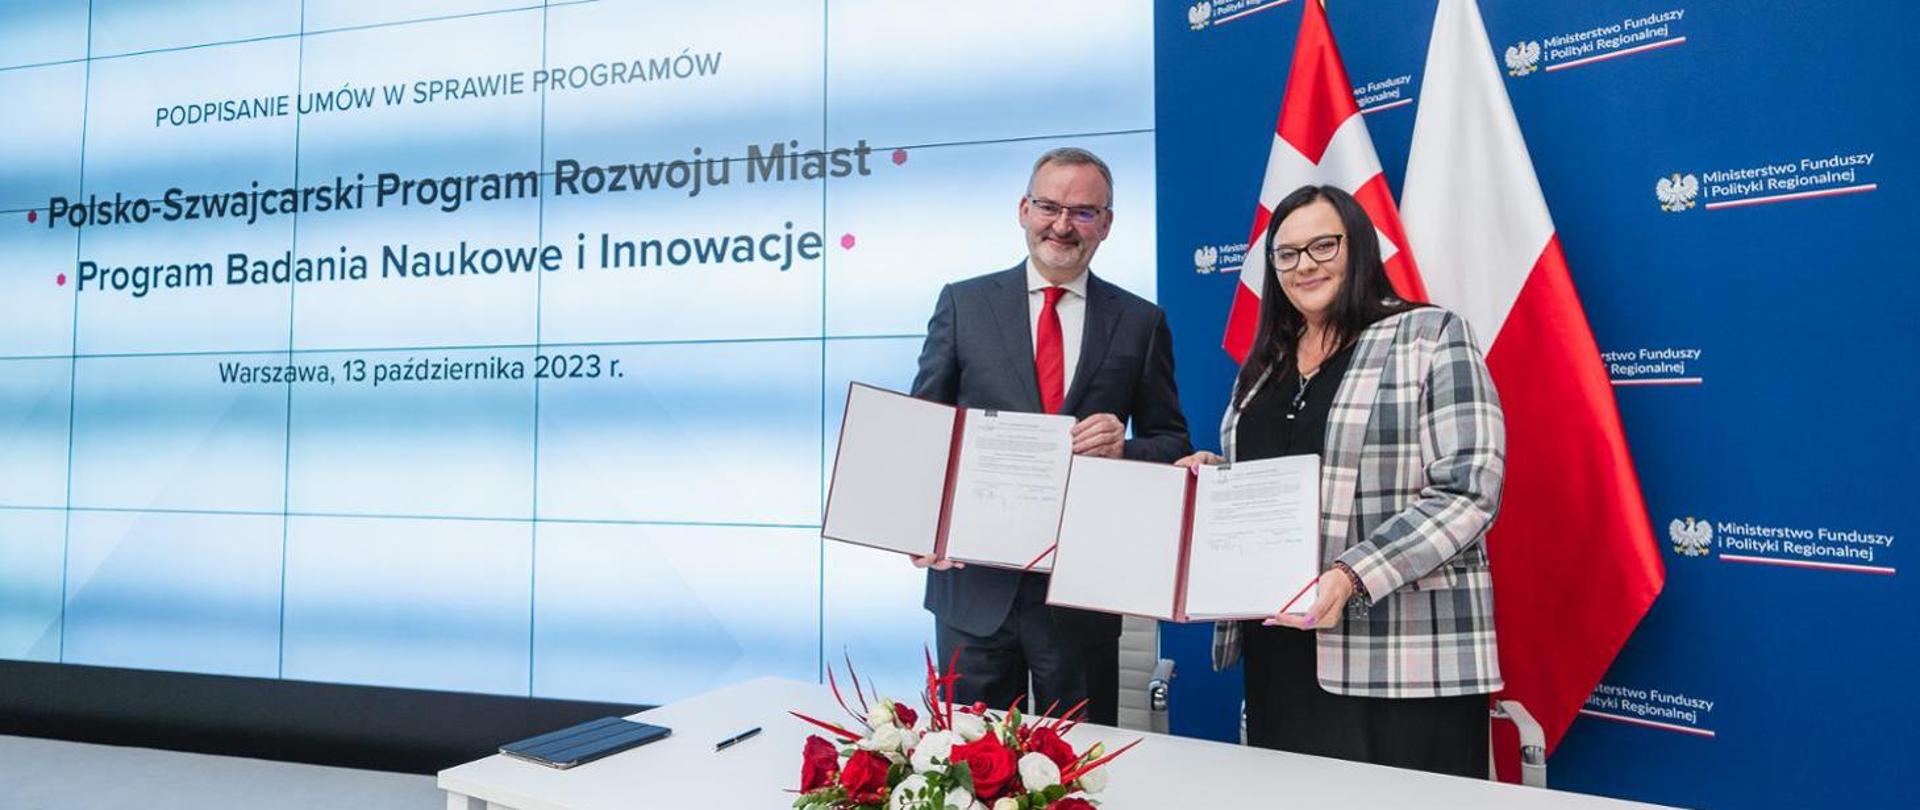 National Centre for Research and Development will manage the research programme under Polish-Swiss cooperation